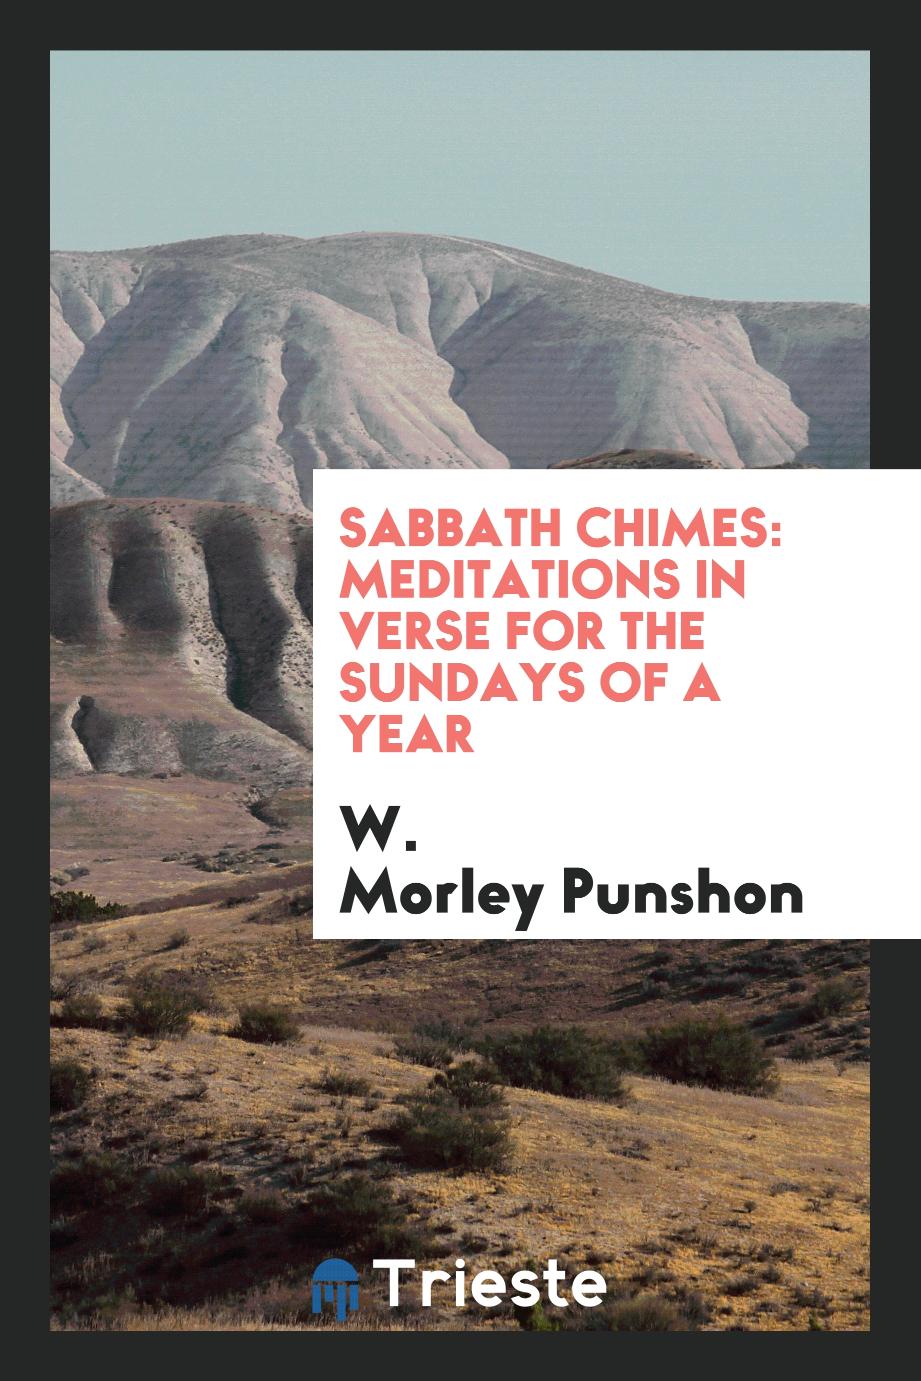 Sabbath Chimes: Meditations in Verse for the Sundays of a Year